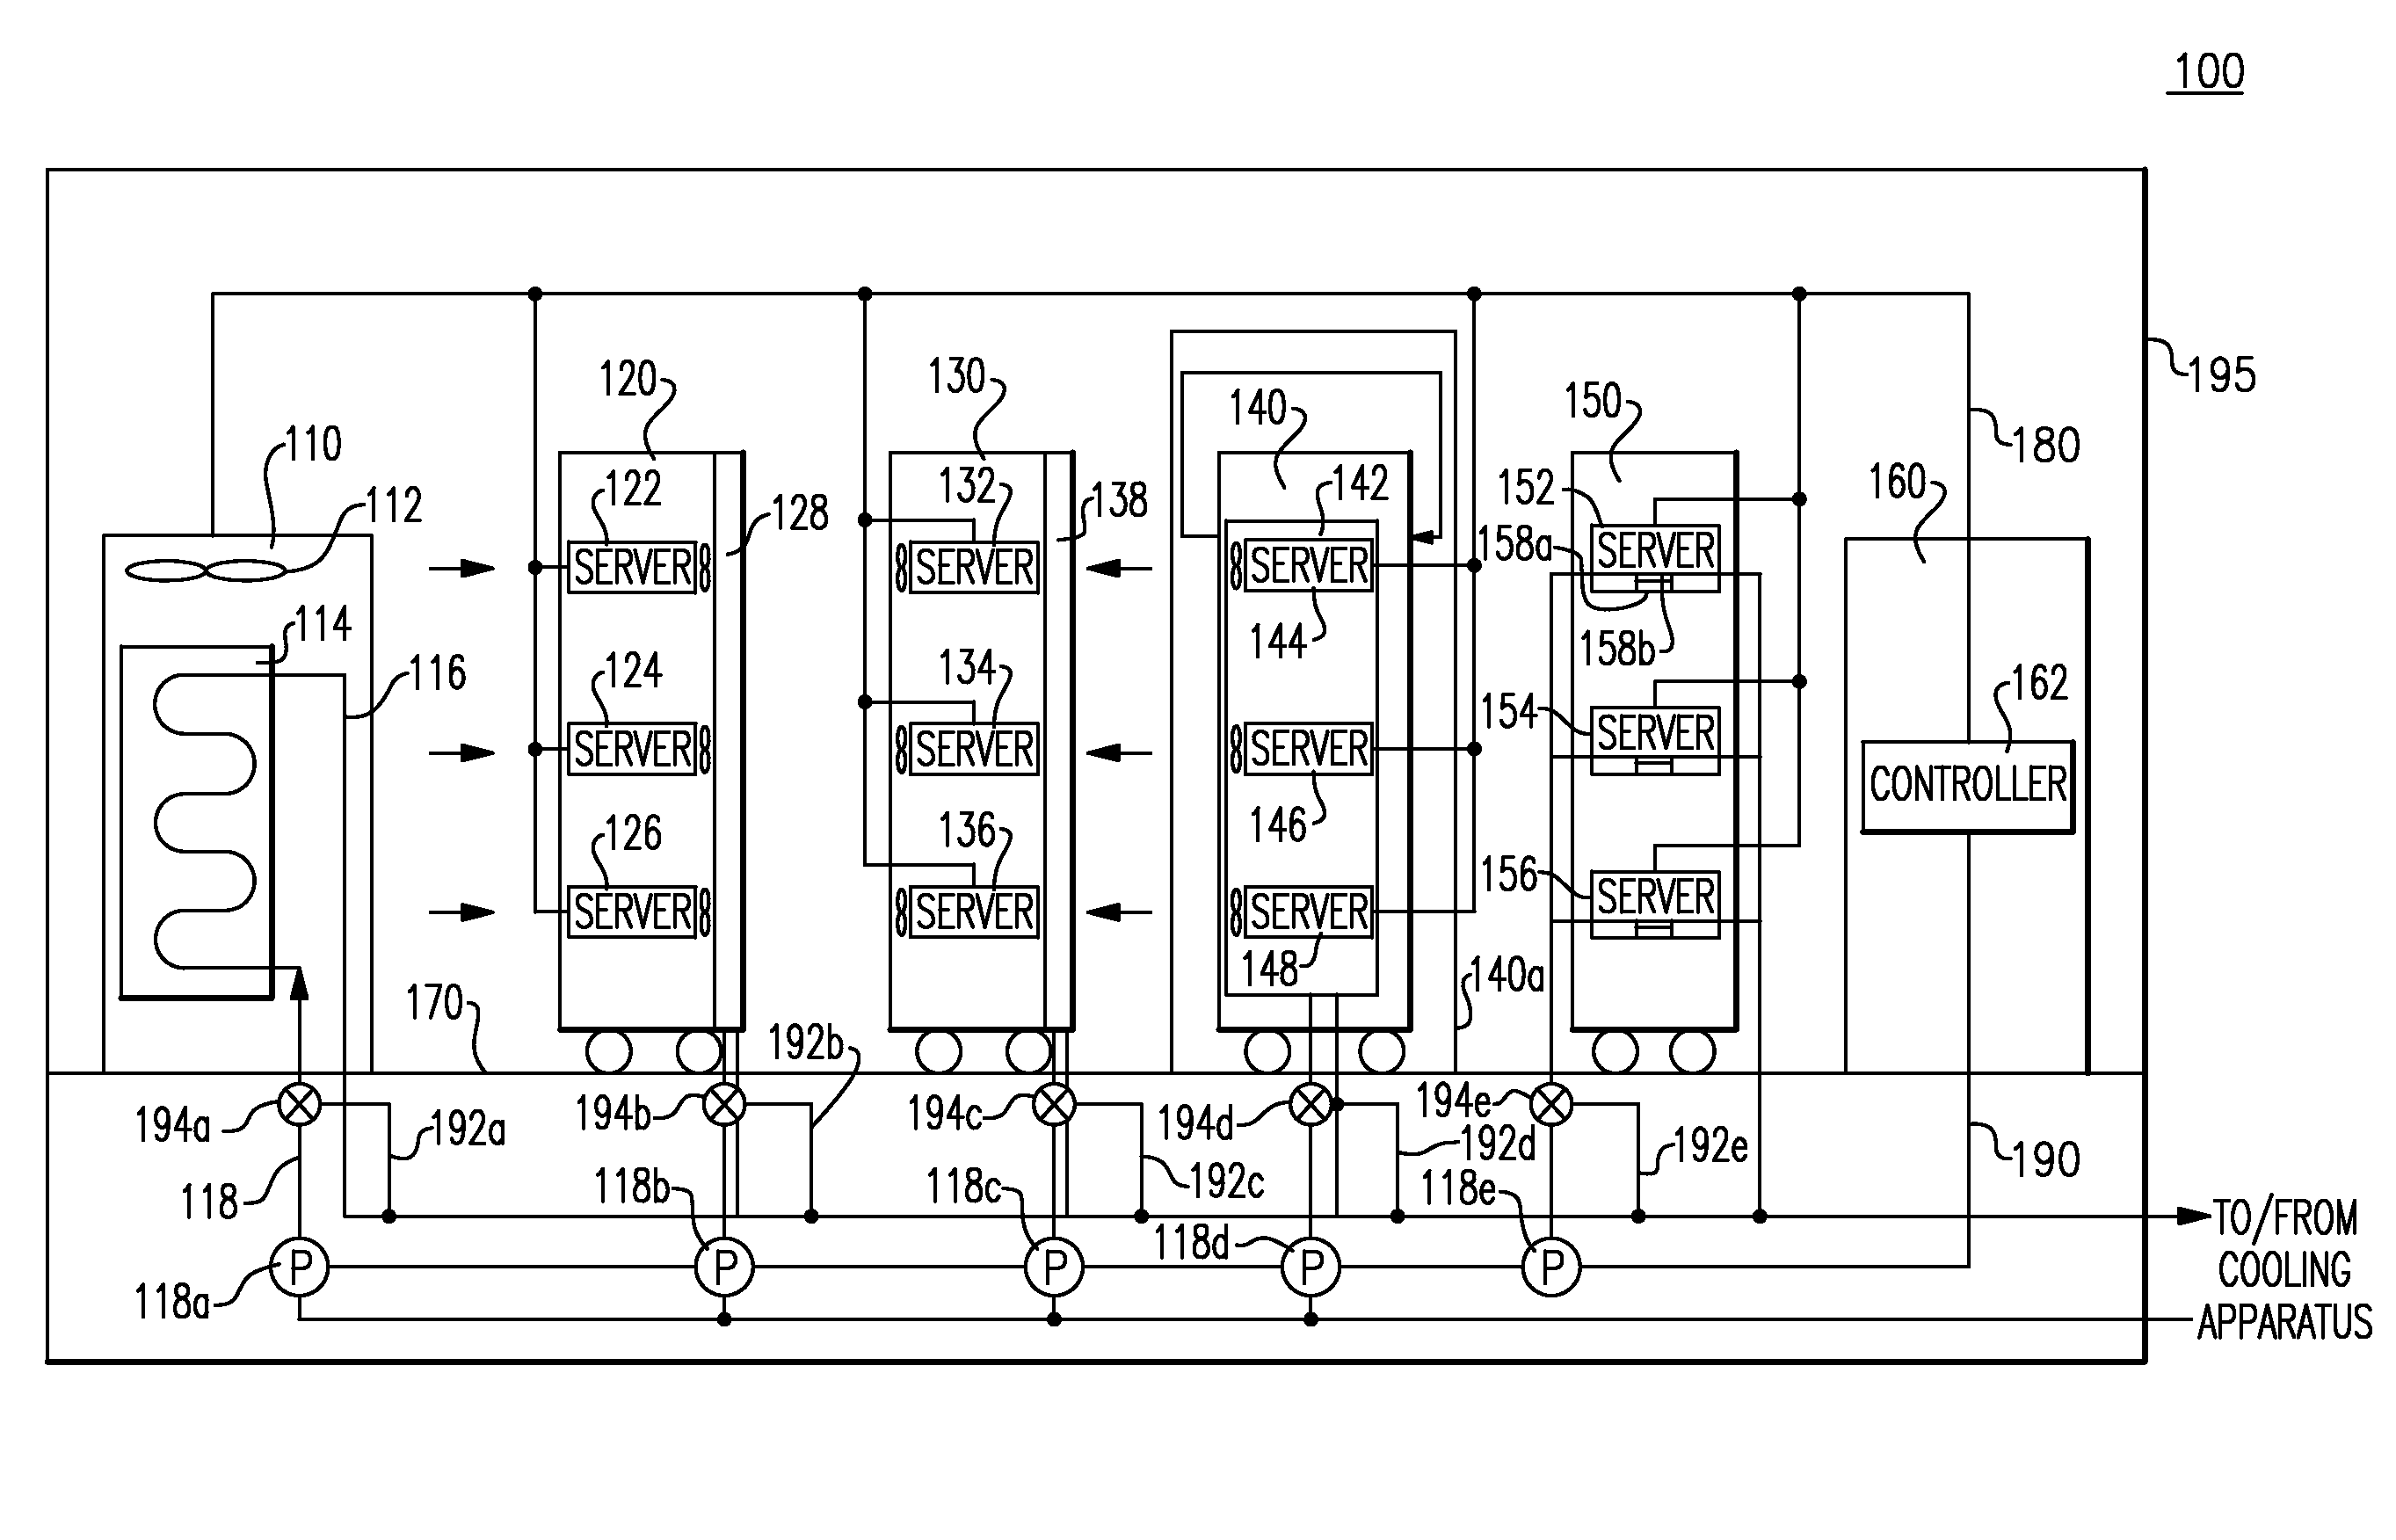 Facilitating Cooling Of An Electronics Rack Employing Water Vapor Compression System